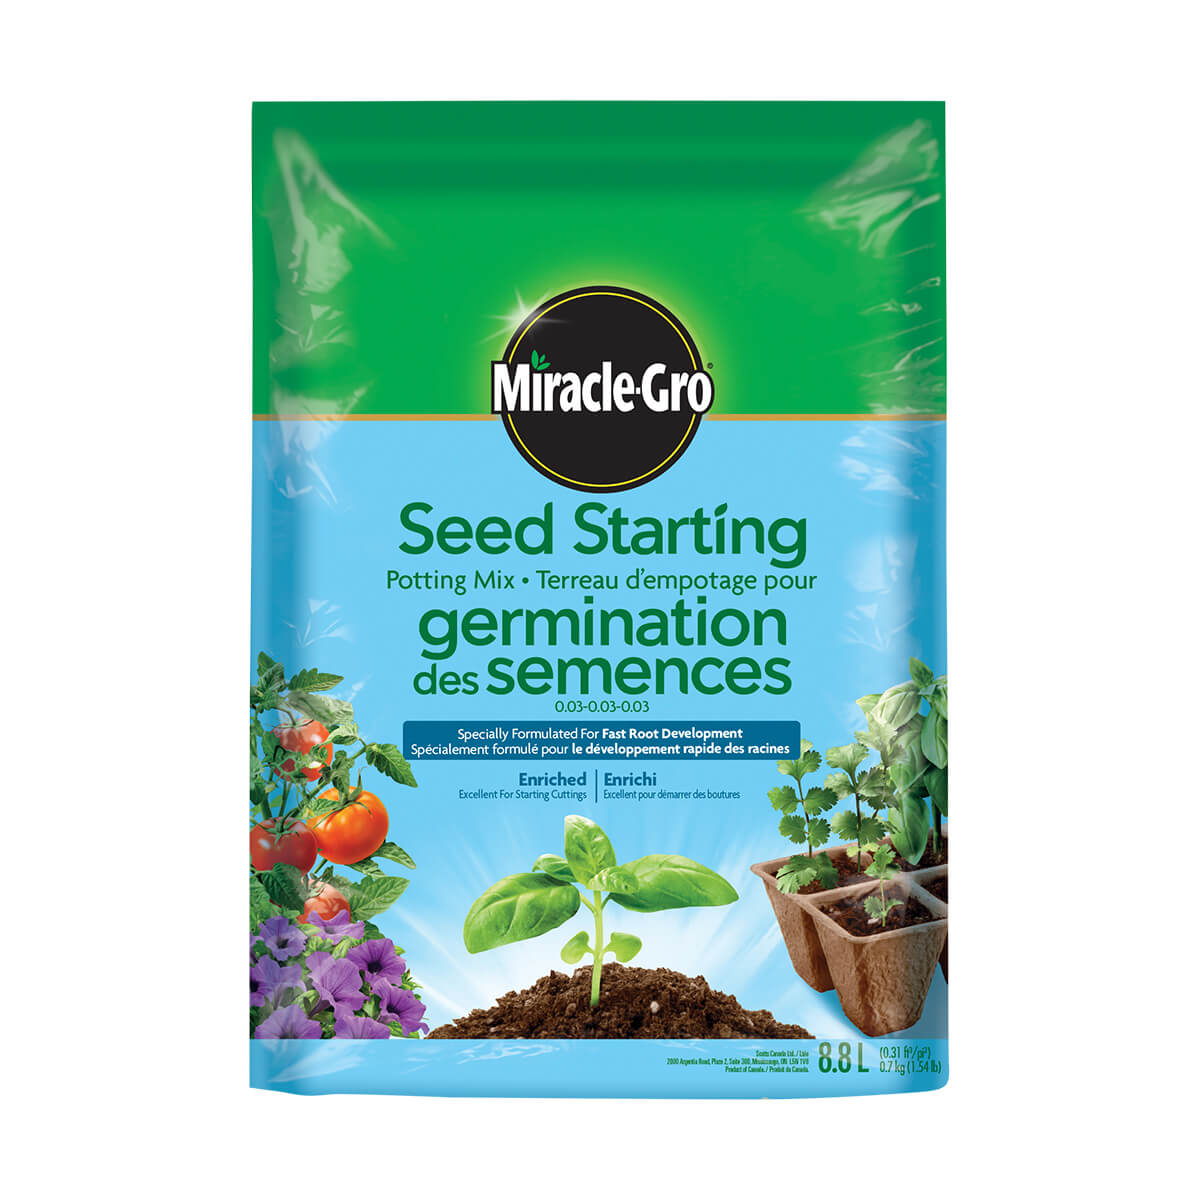 Miracle-Gro Seed Starting Potting Mix - 8.8 L